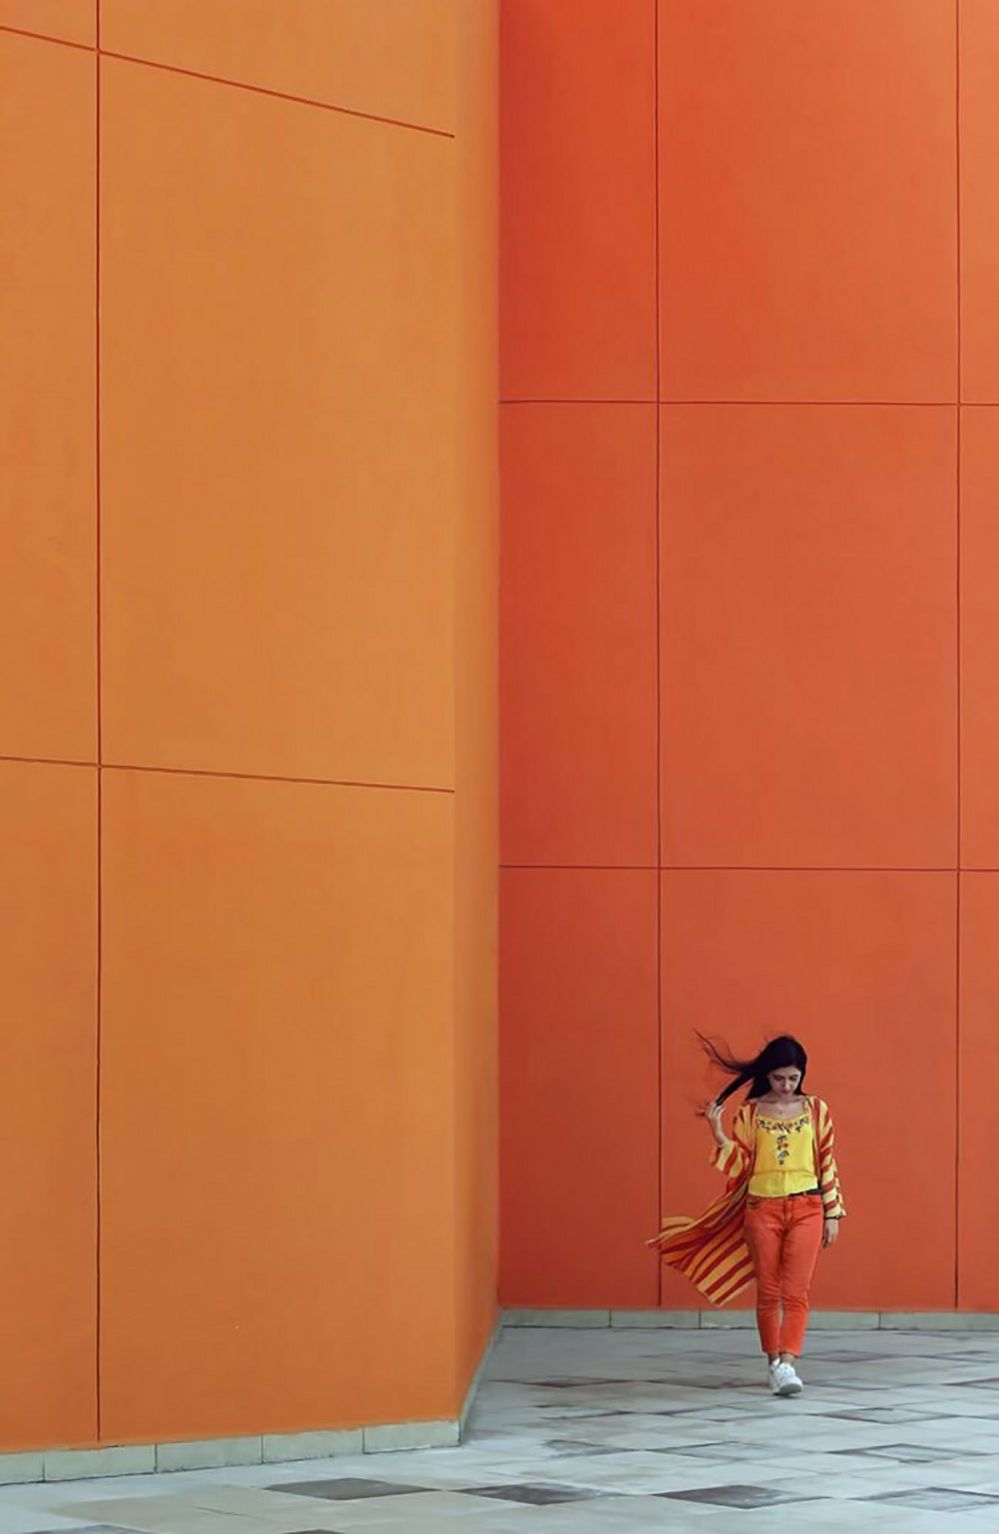 A young woman in bright orange and yellow clothing posing beside a similarly orange wall